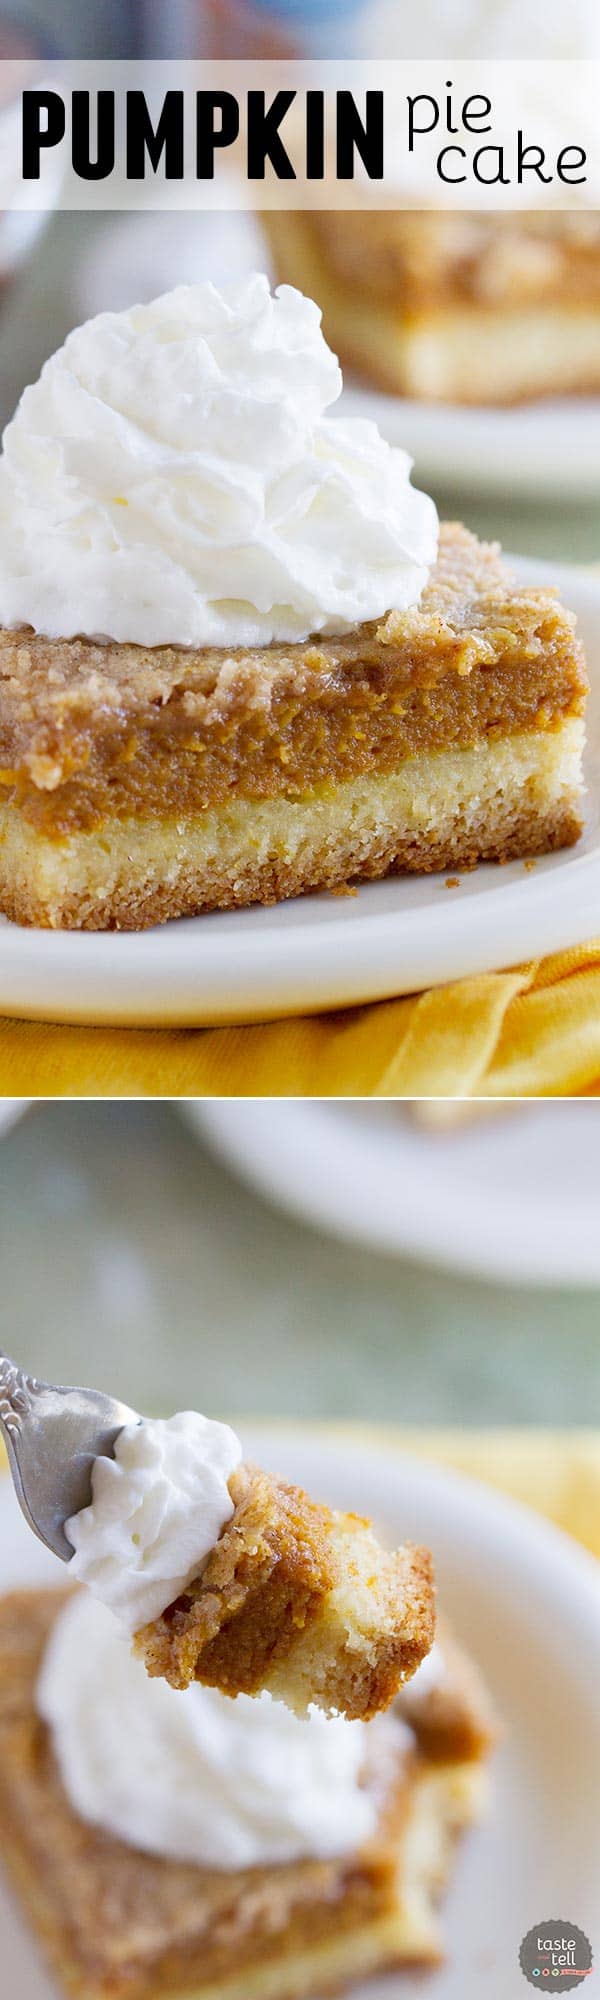 A favorite holiday staple turned into an easy and delicious cake! This Pumpkin Pie Cake has a cake crust with a creamy pumpkin center and a crunchy topping - a favorite the whole family loves!